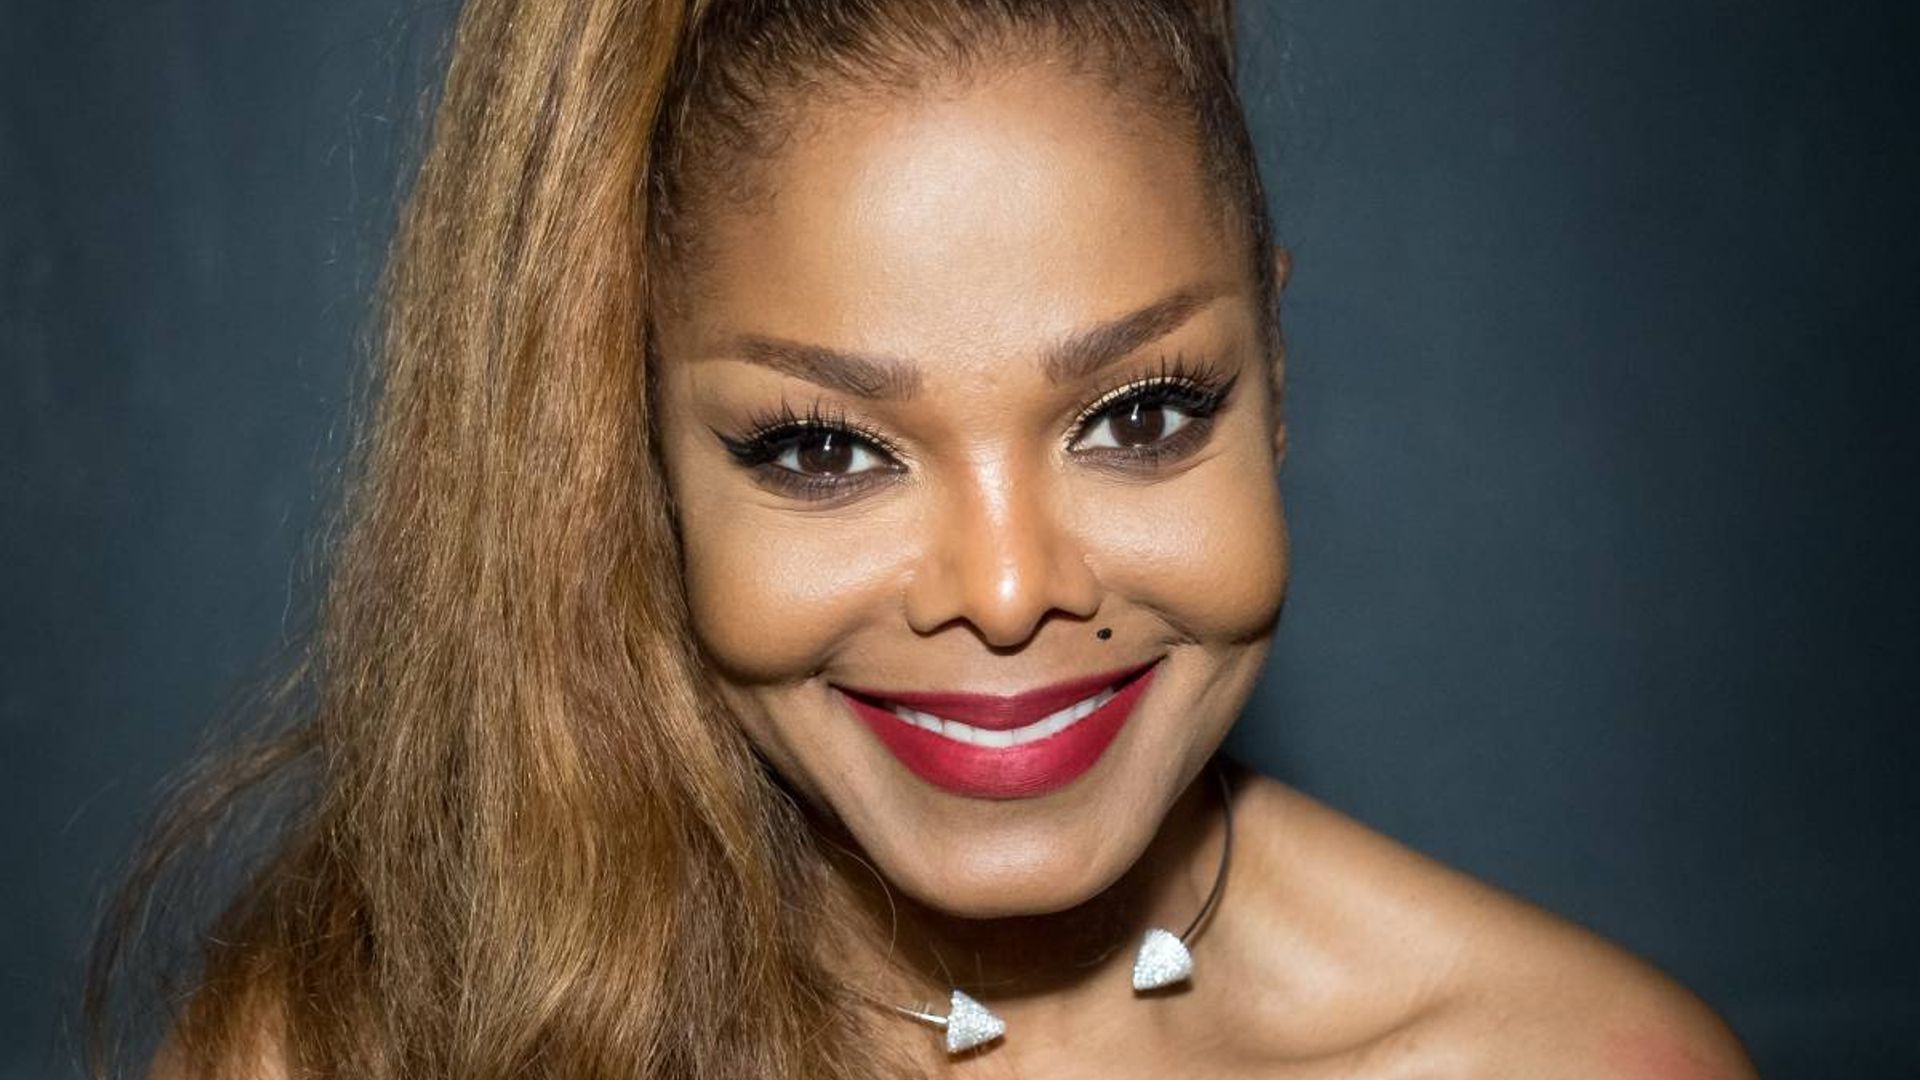 Janet Jackson is branded a goddess in incredible BTS fashion video